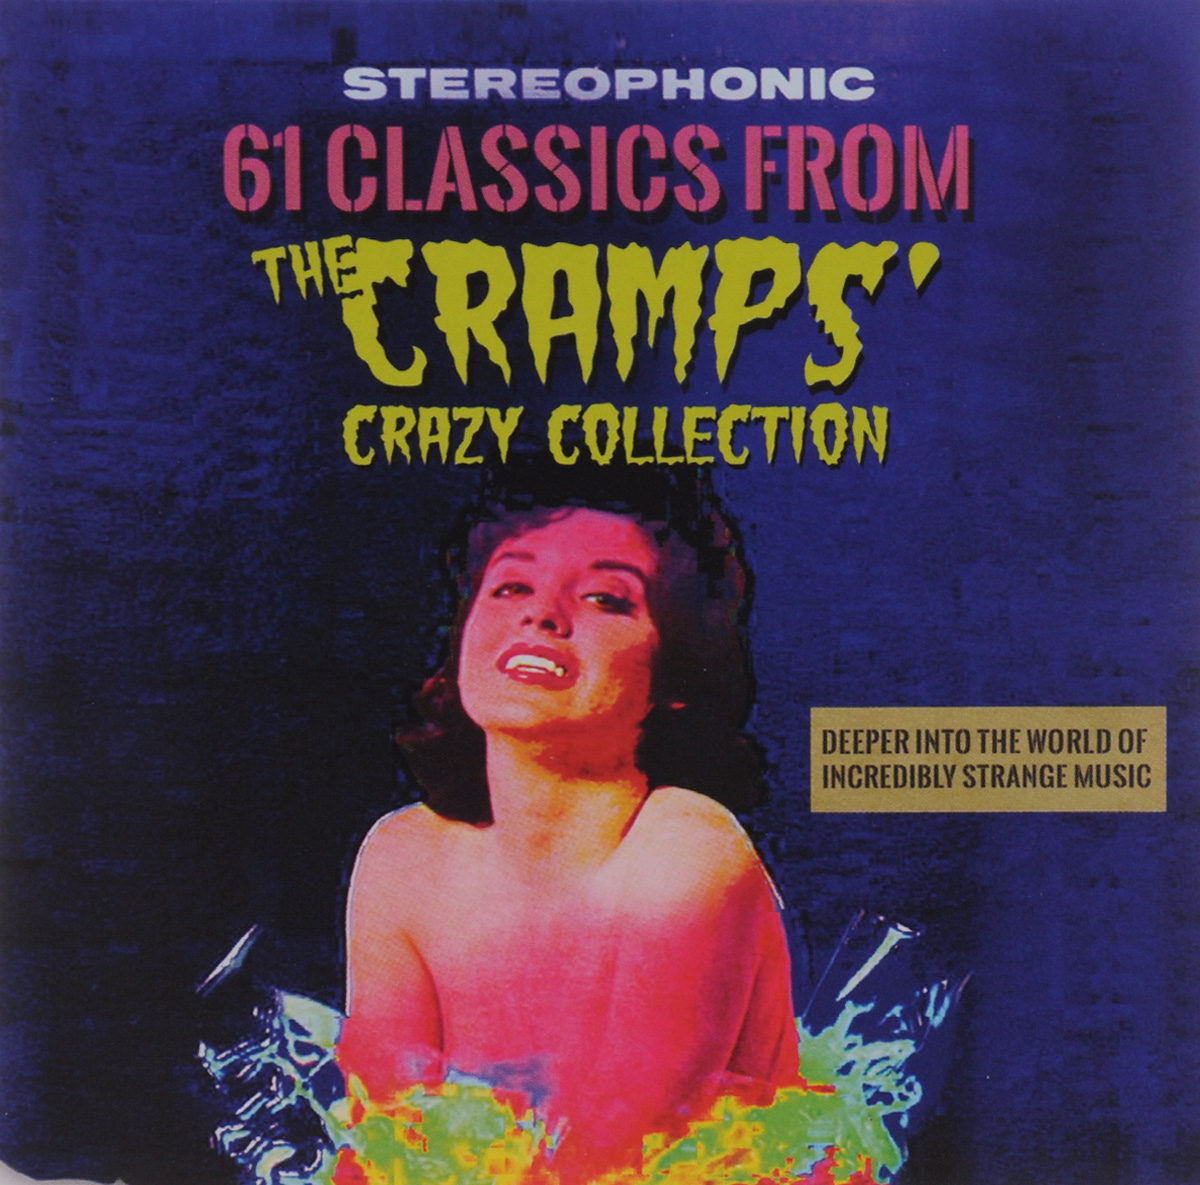 61 Classics From The Cramps. Crazy Collection (2CD)